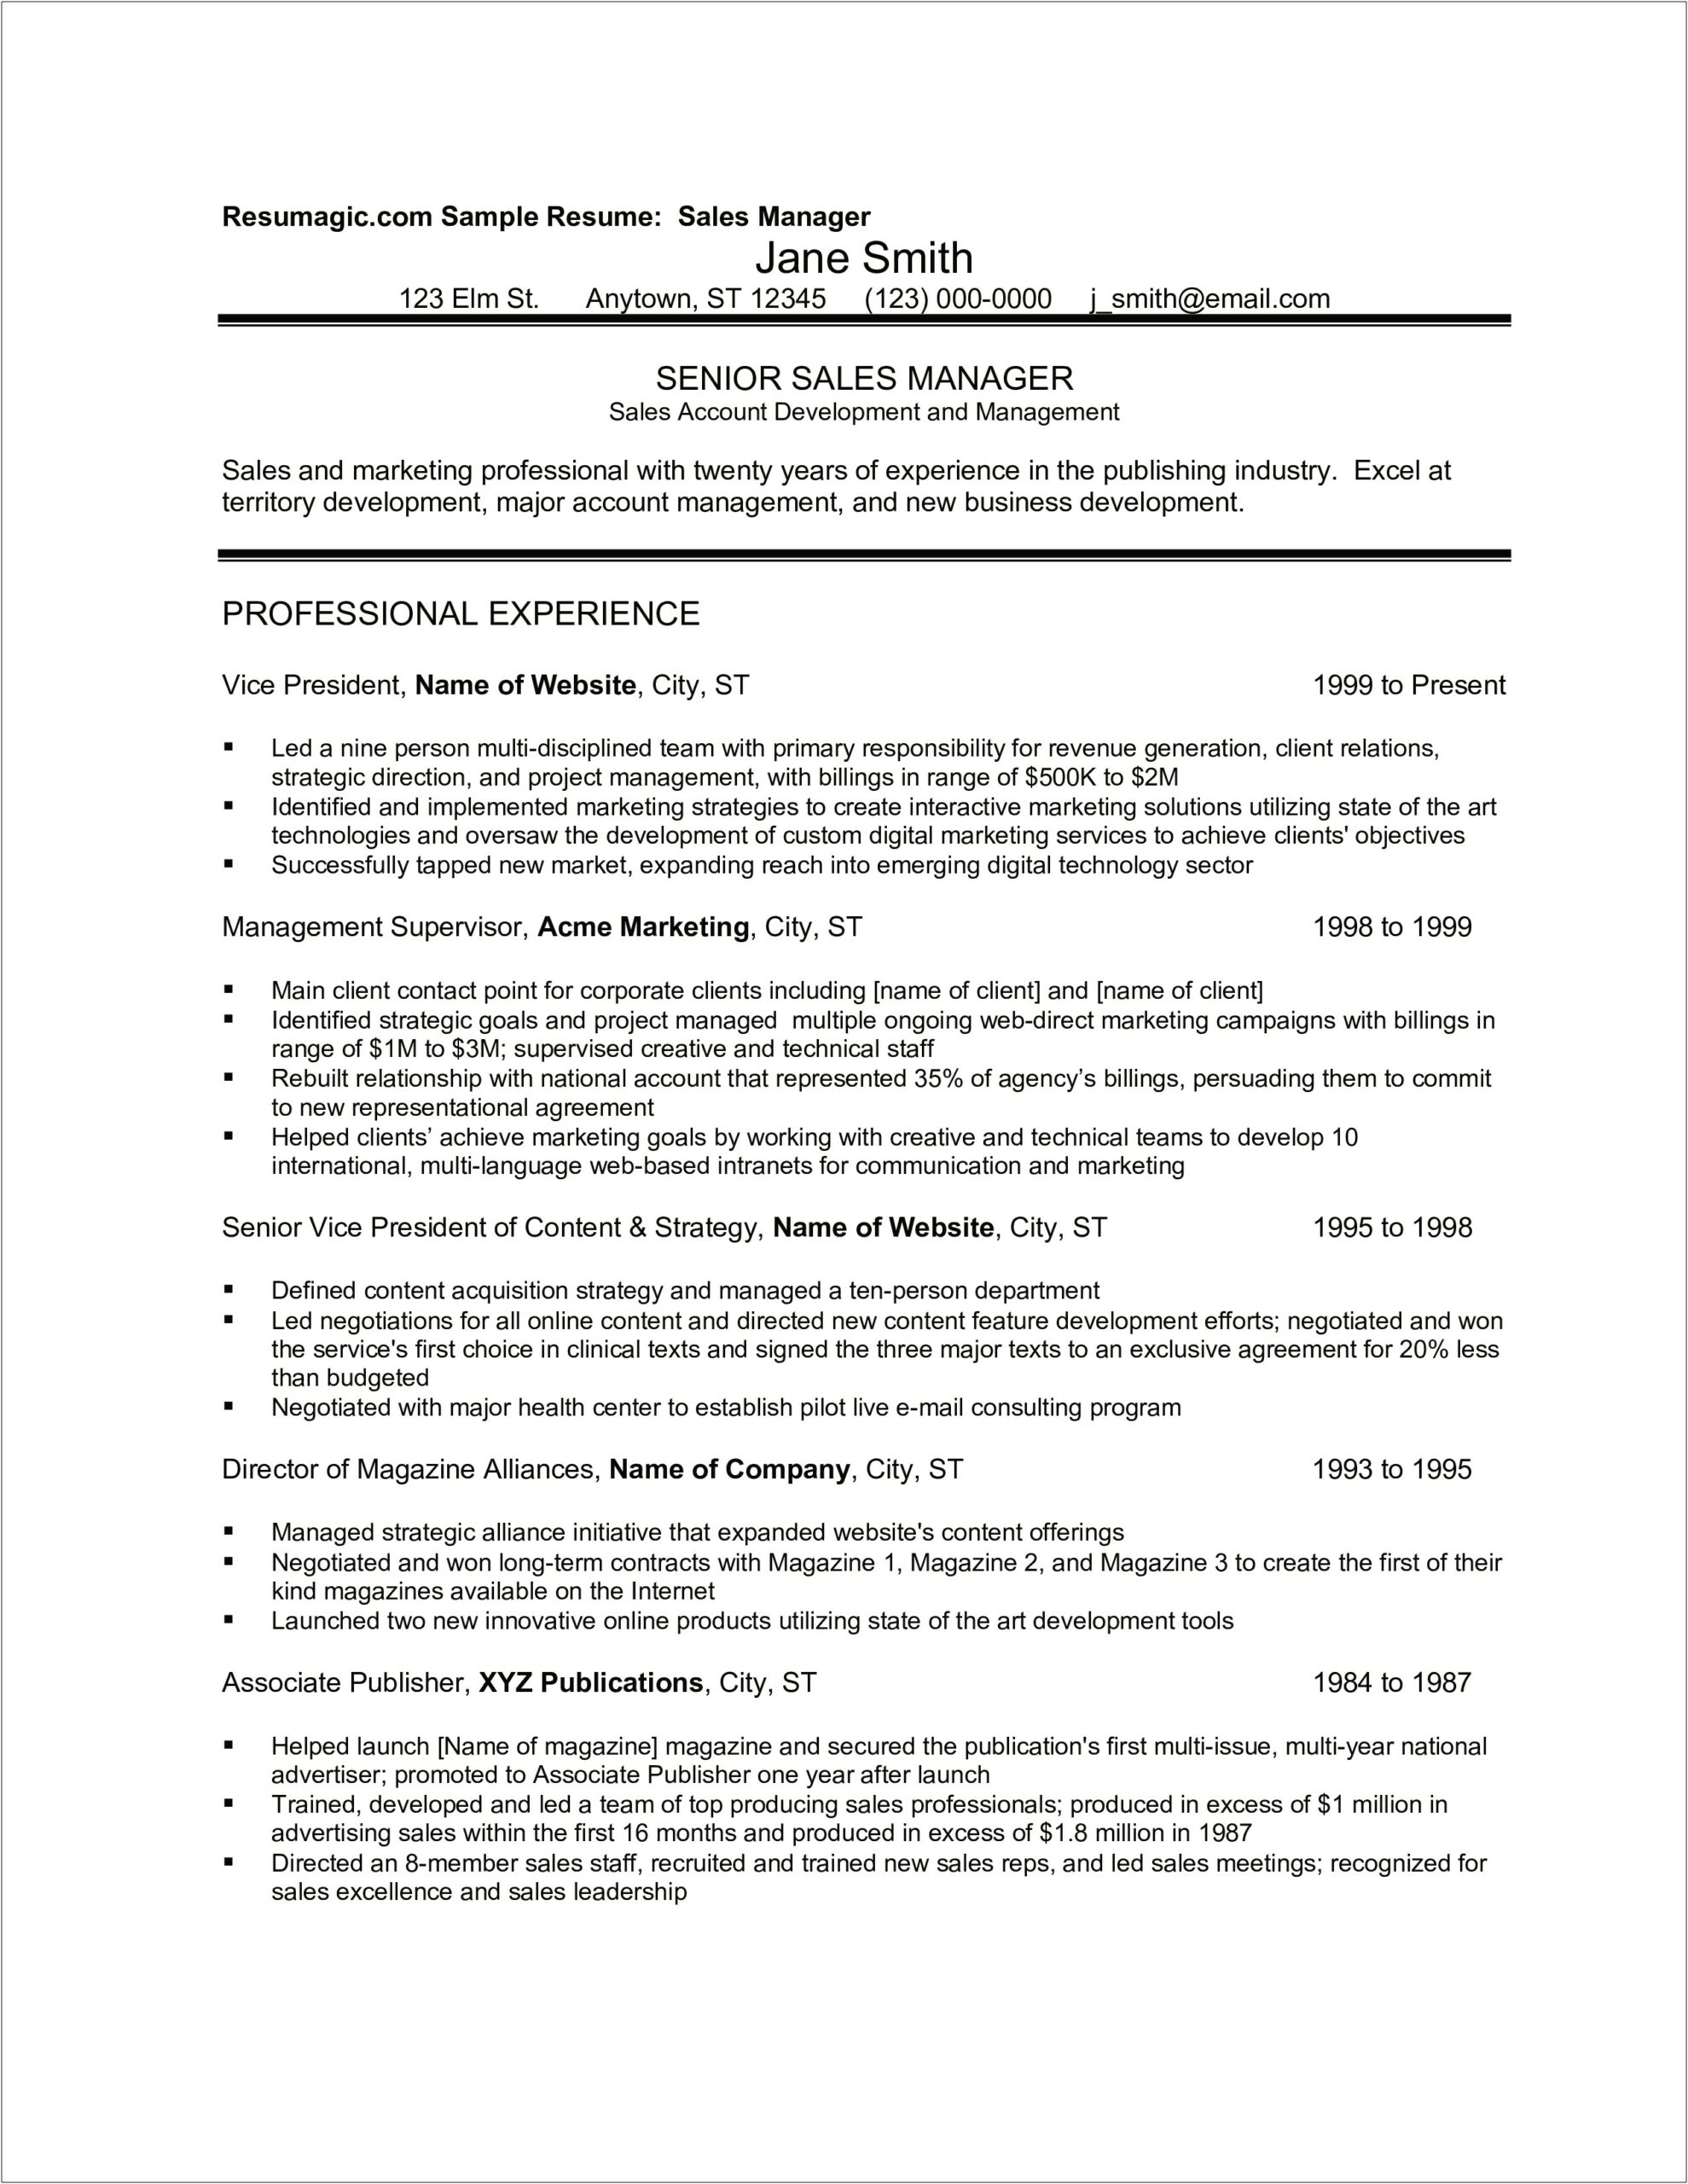 Resume Samples For Director Of Sales